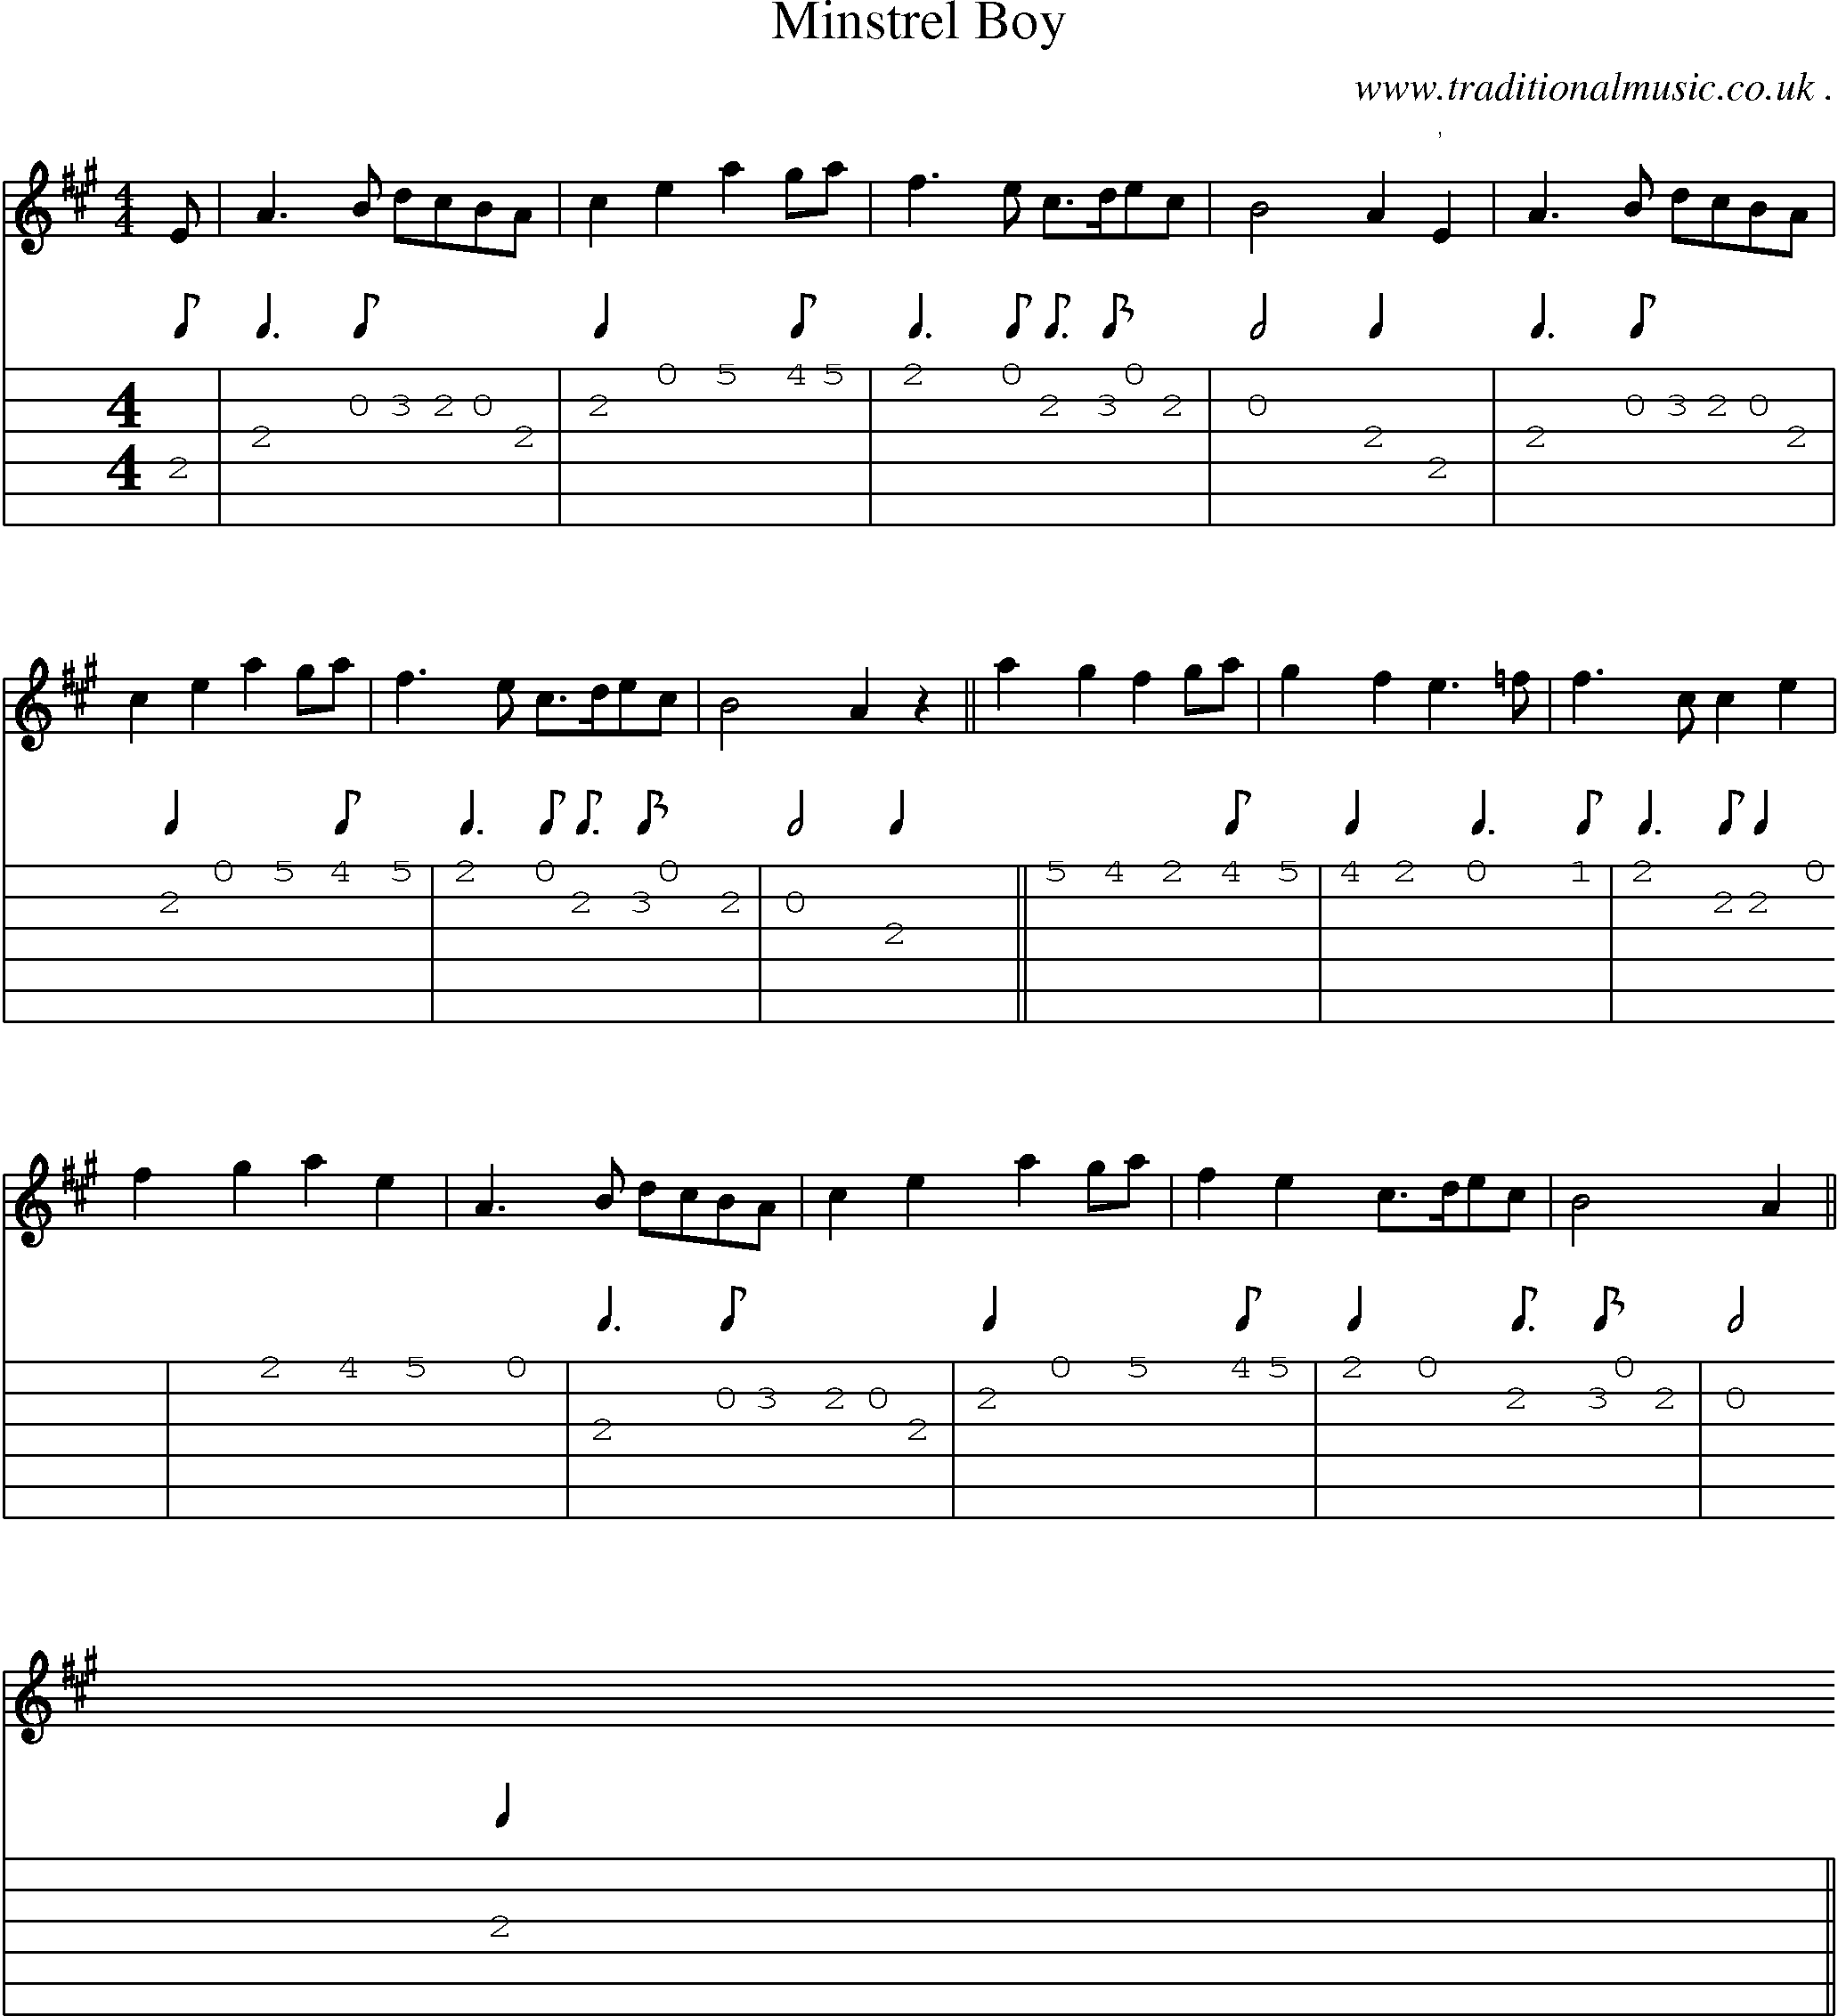 Sheet-music  score, Chords and Guitar Tabs for Minstrel Boy